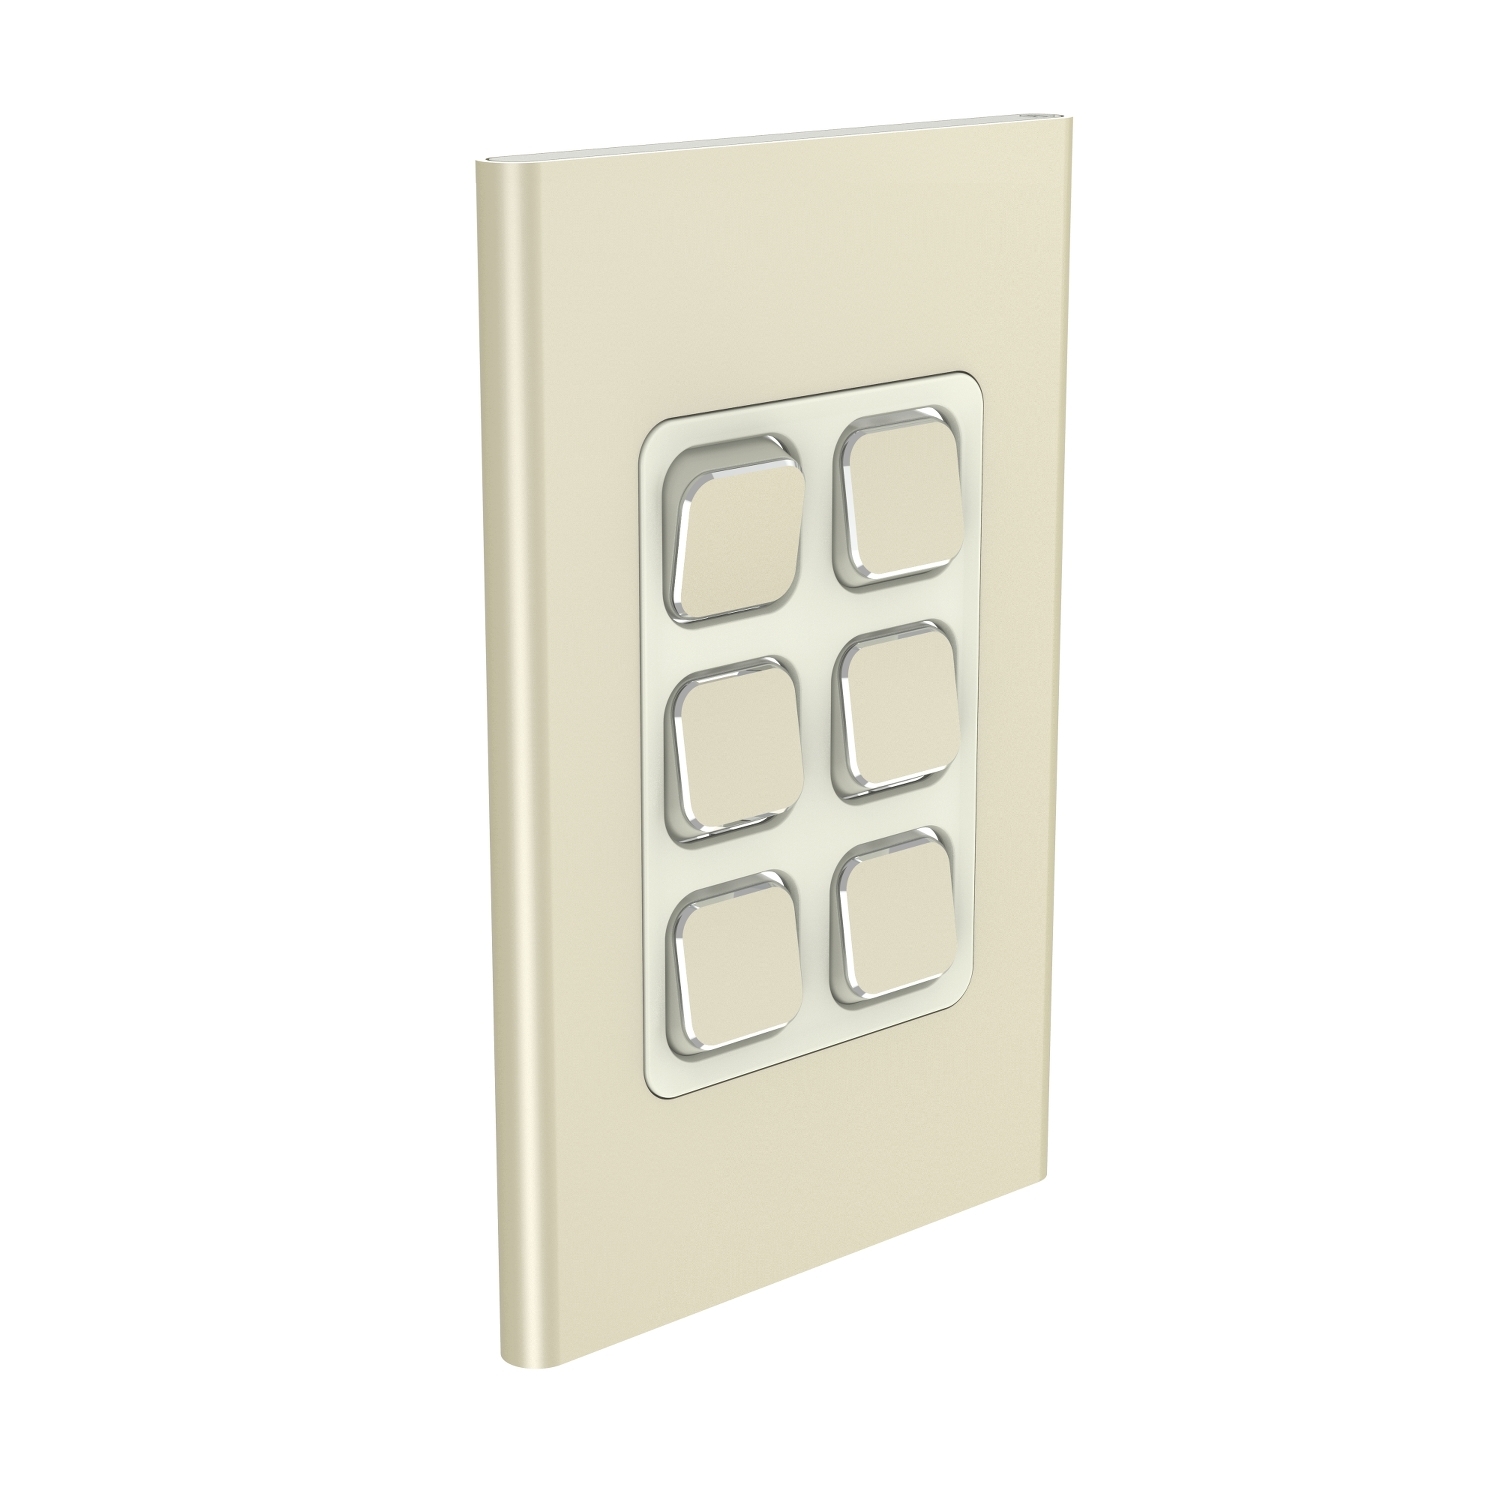 PDL Iconic Styl, cover frame, 6 switches, vertical - Crowne